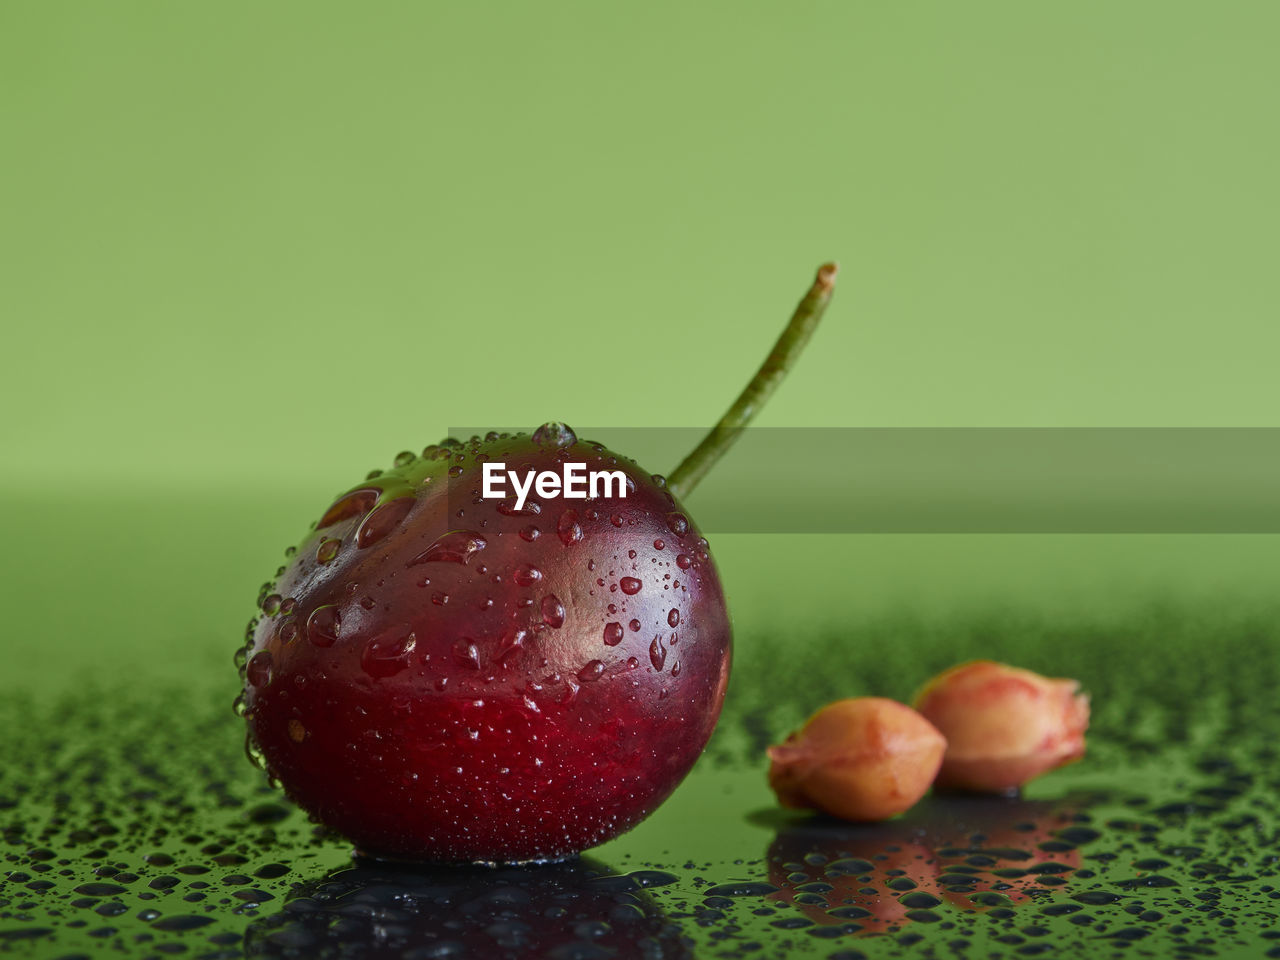 Cherry with two bones on a green wet background with water drops.